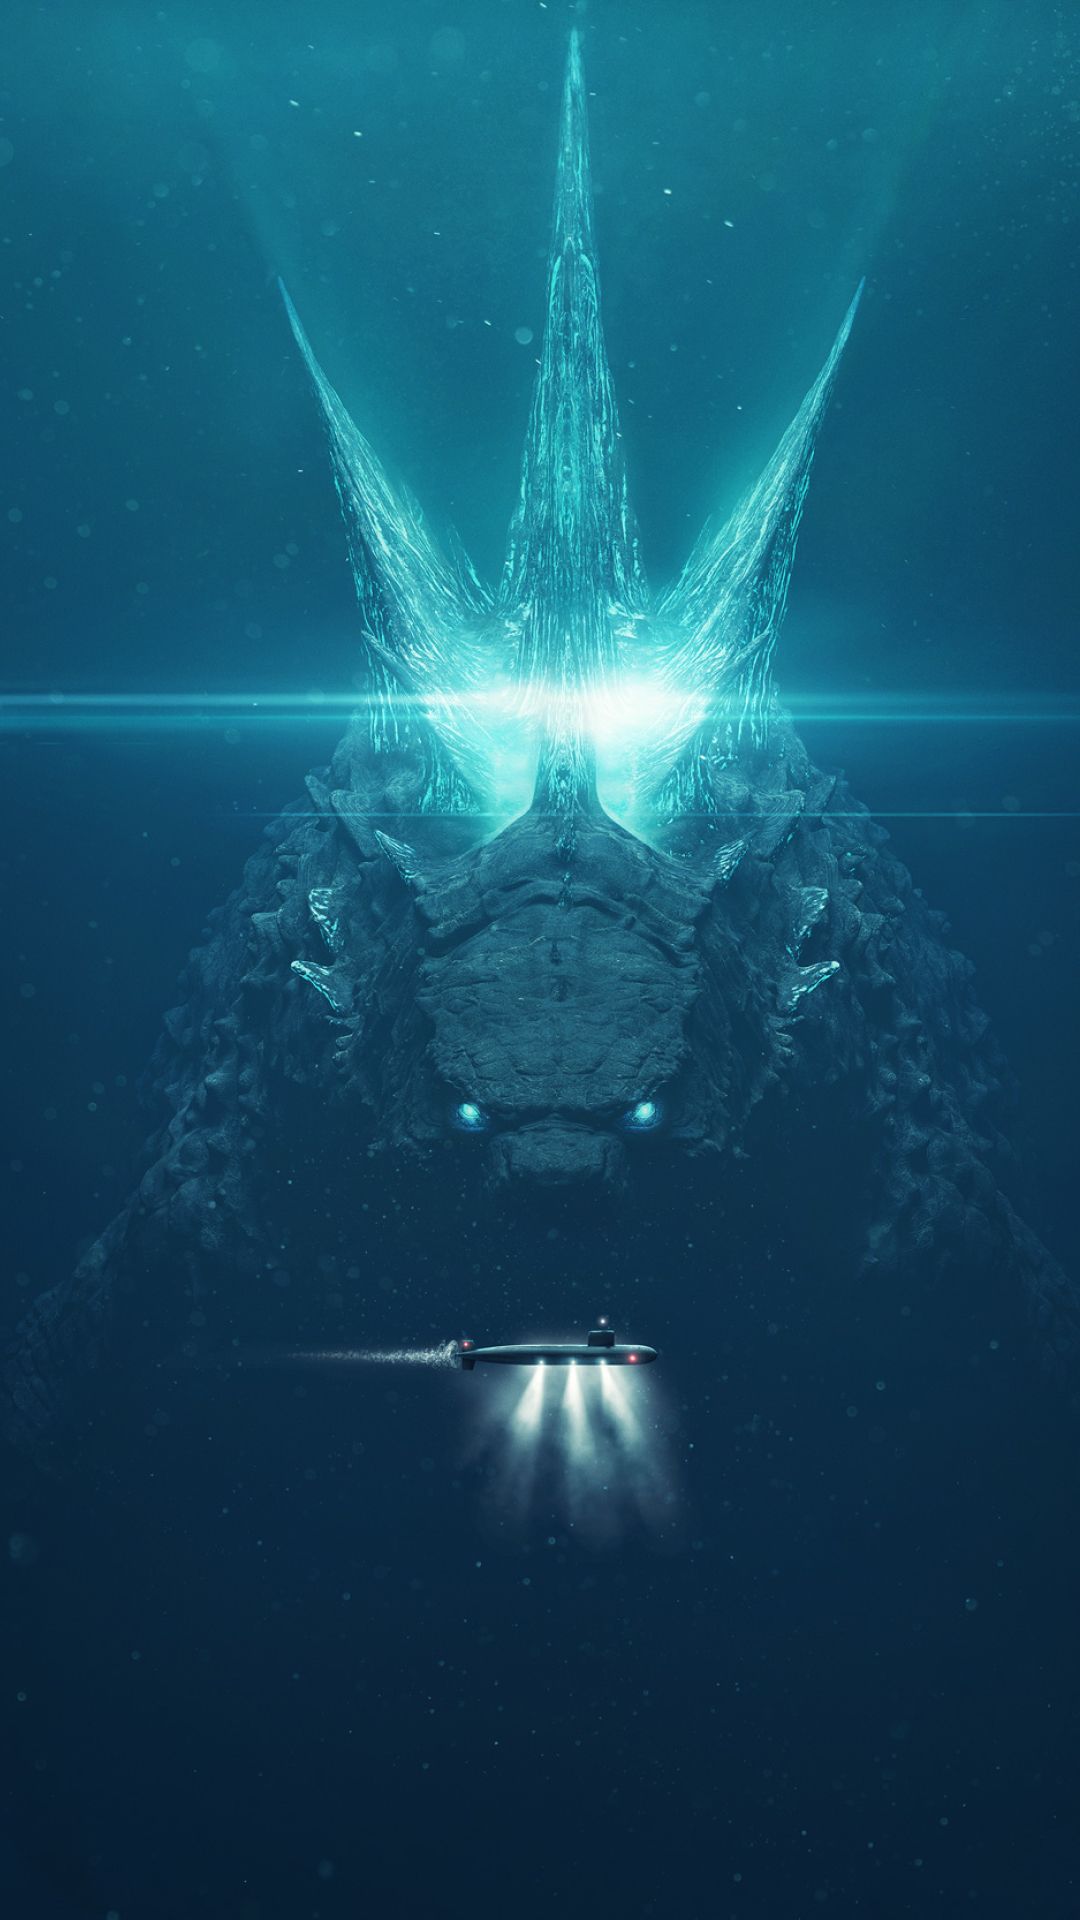 Godzilla King of the Monsters 2019 Poster iPhone 6s, 6 Plus and Pixel XL , One Plus 3t, 5 Wallpaper, HD Movies 4K Wallpaper, Image, Photo and. Godzilla wallpaper, All godzilla monsters, Godzilla